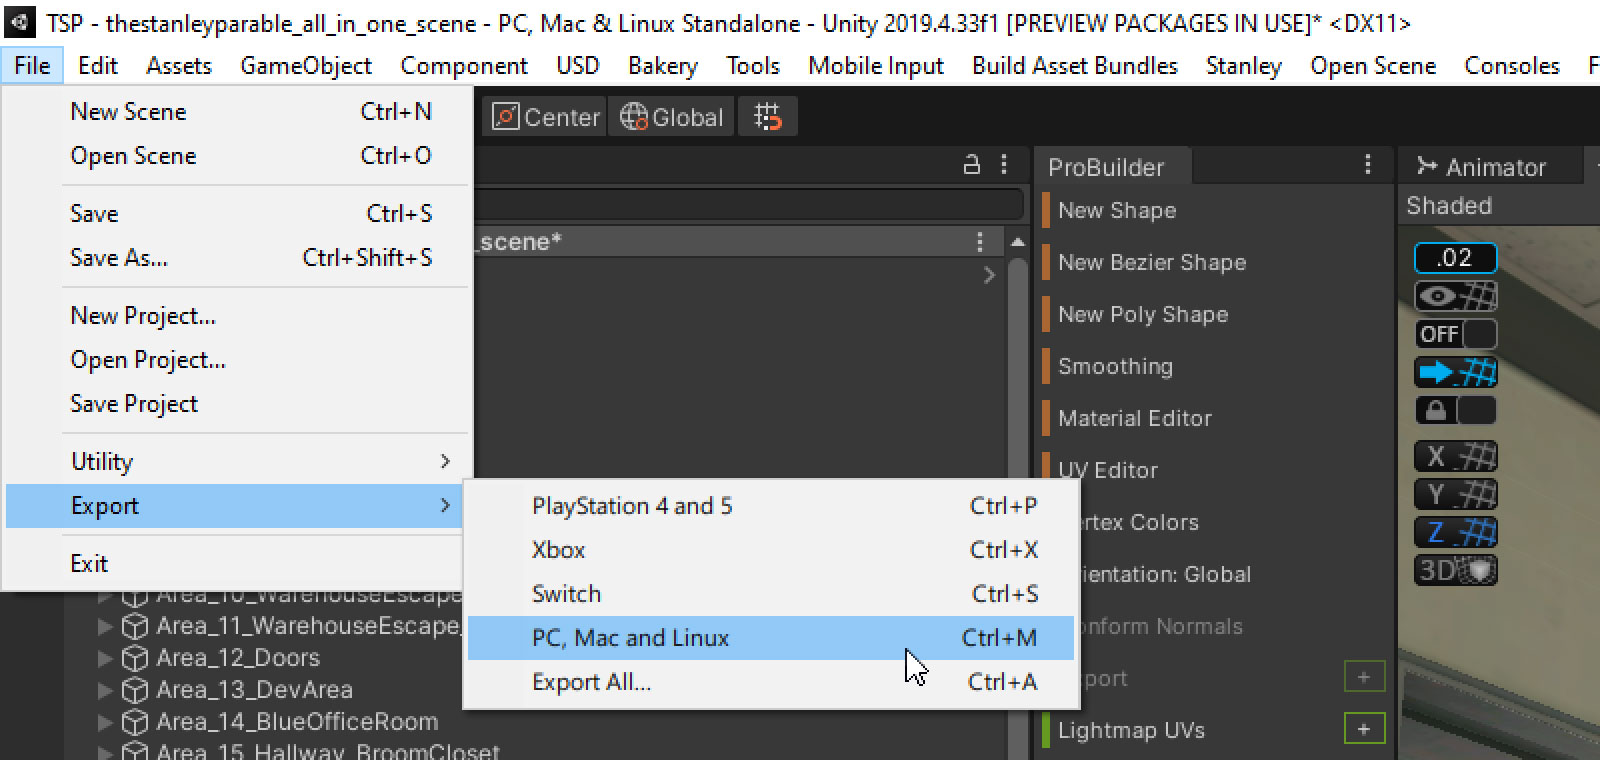 Screenshot of Unity Editor, menuing to File > Export > PS4, PS5, Xbox, Switch, PC, Mac, and Linux